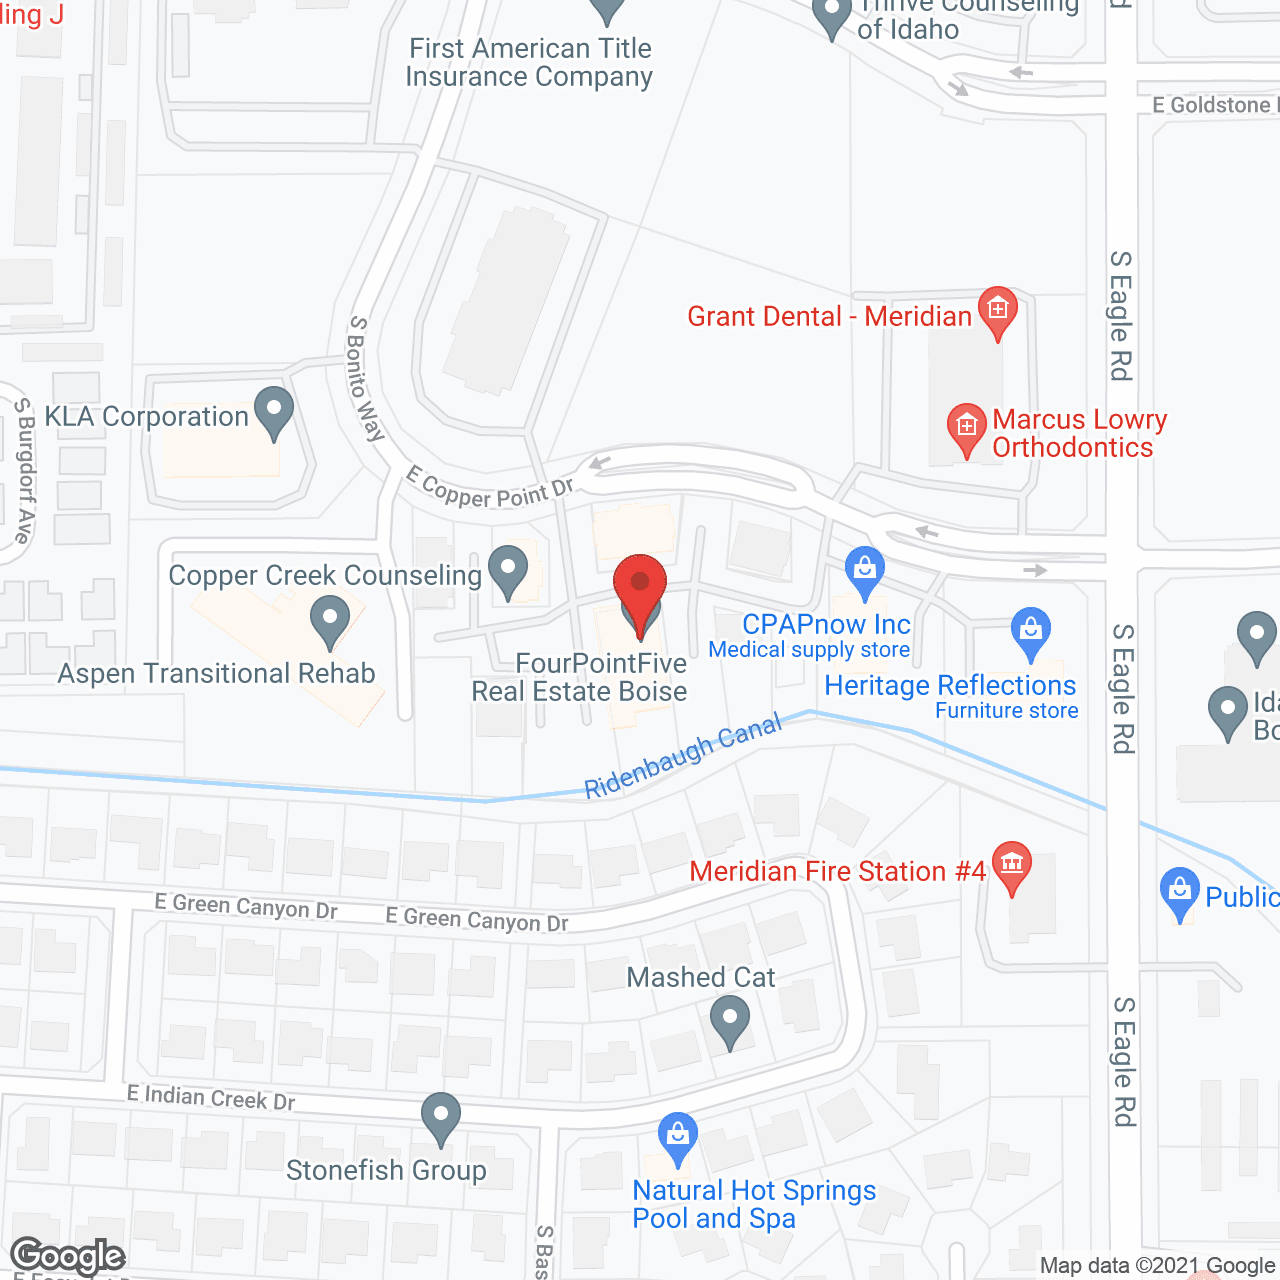 Homewatch CareGivers of Boise/Meridian, ID in google map